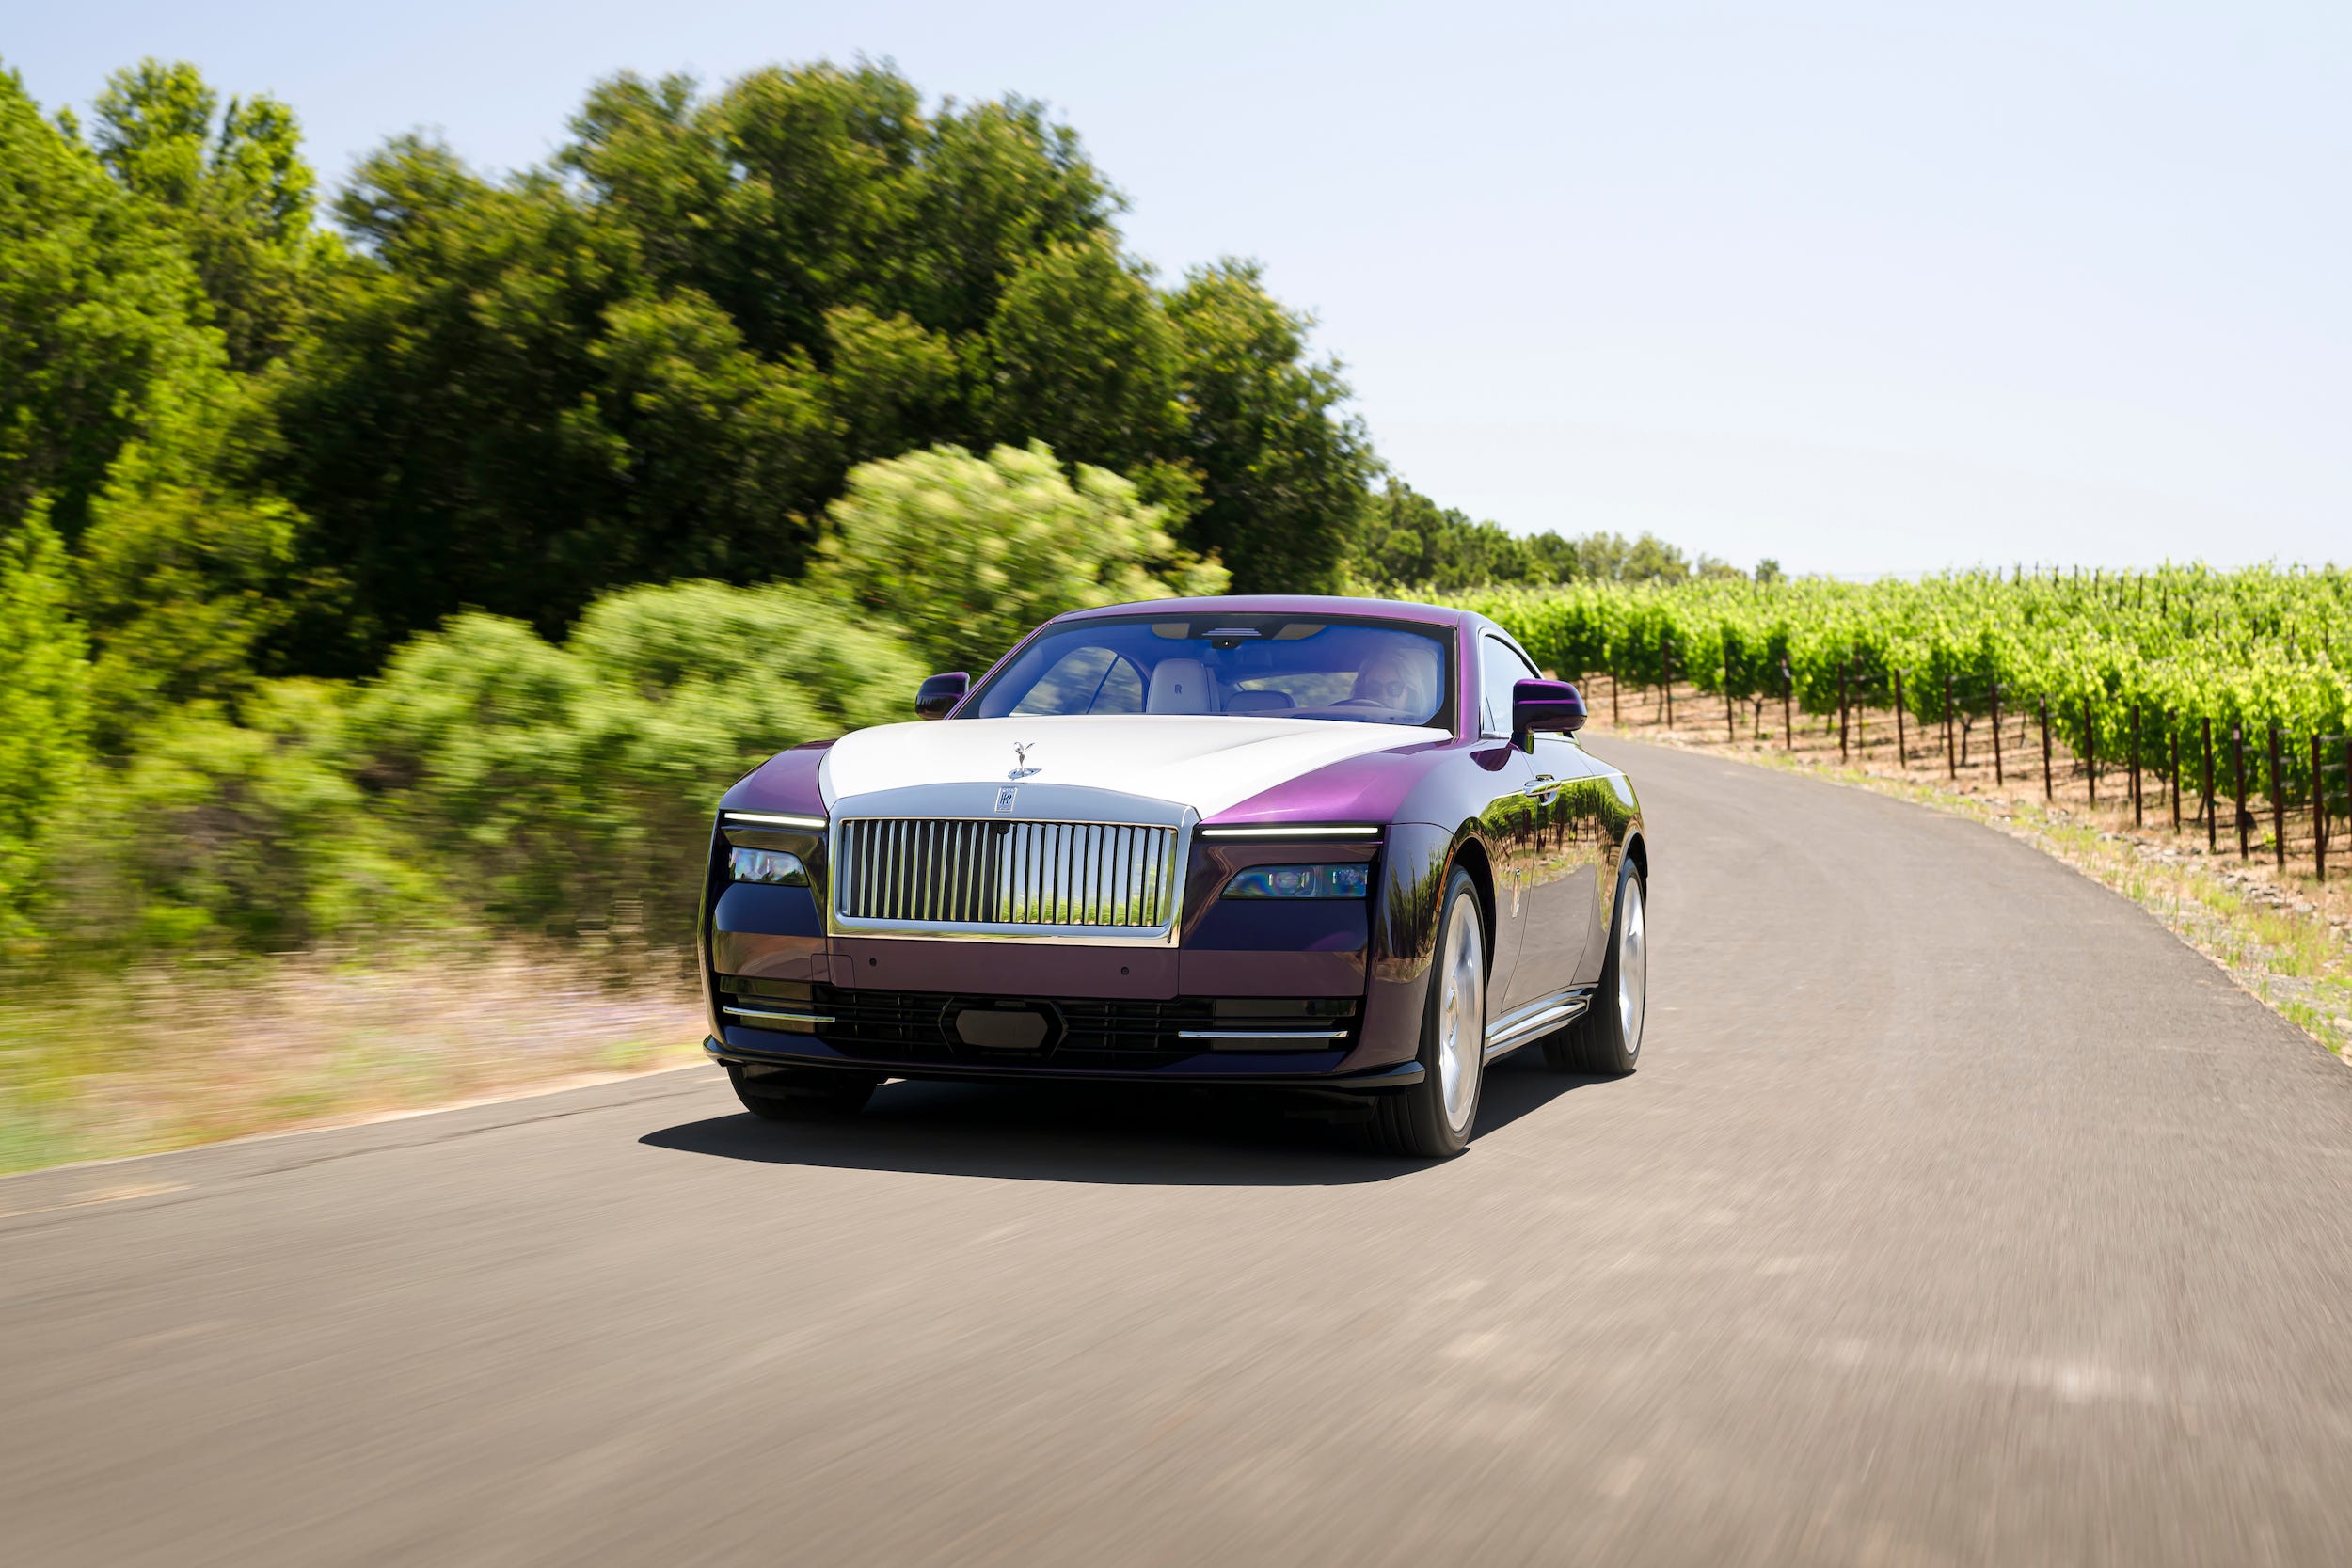 A purple and white Rolls-Royce Spectre car drives down a road with trees in the background.